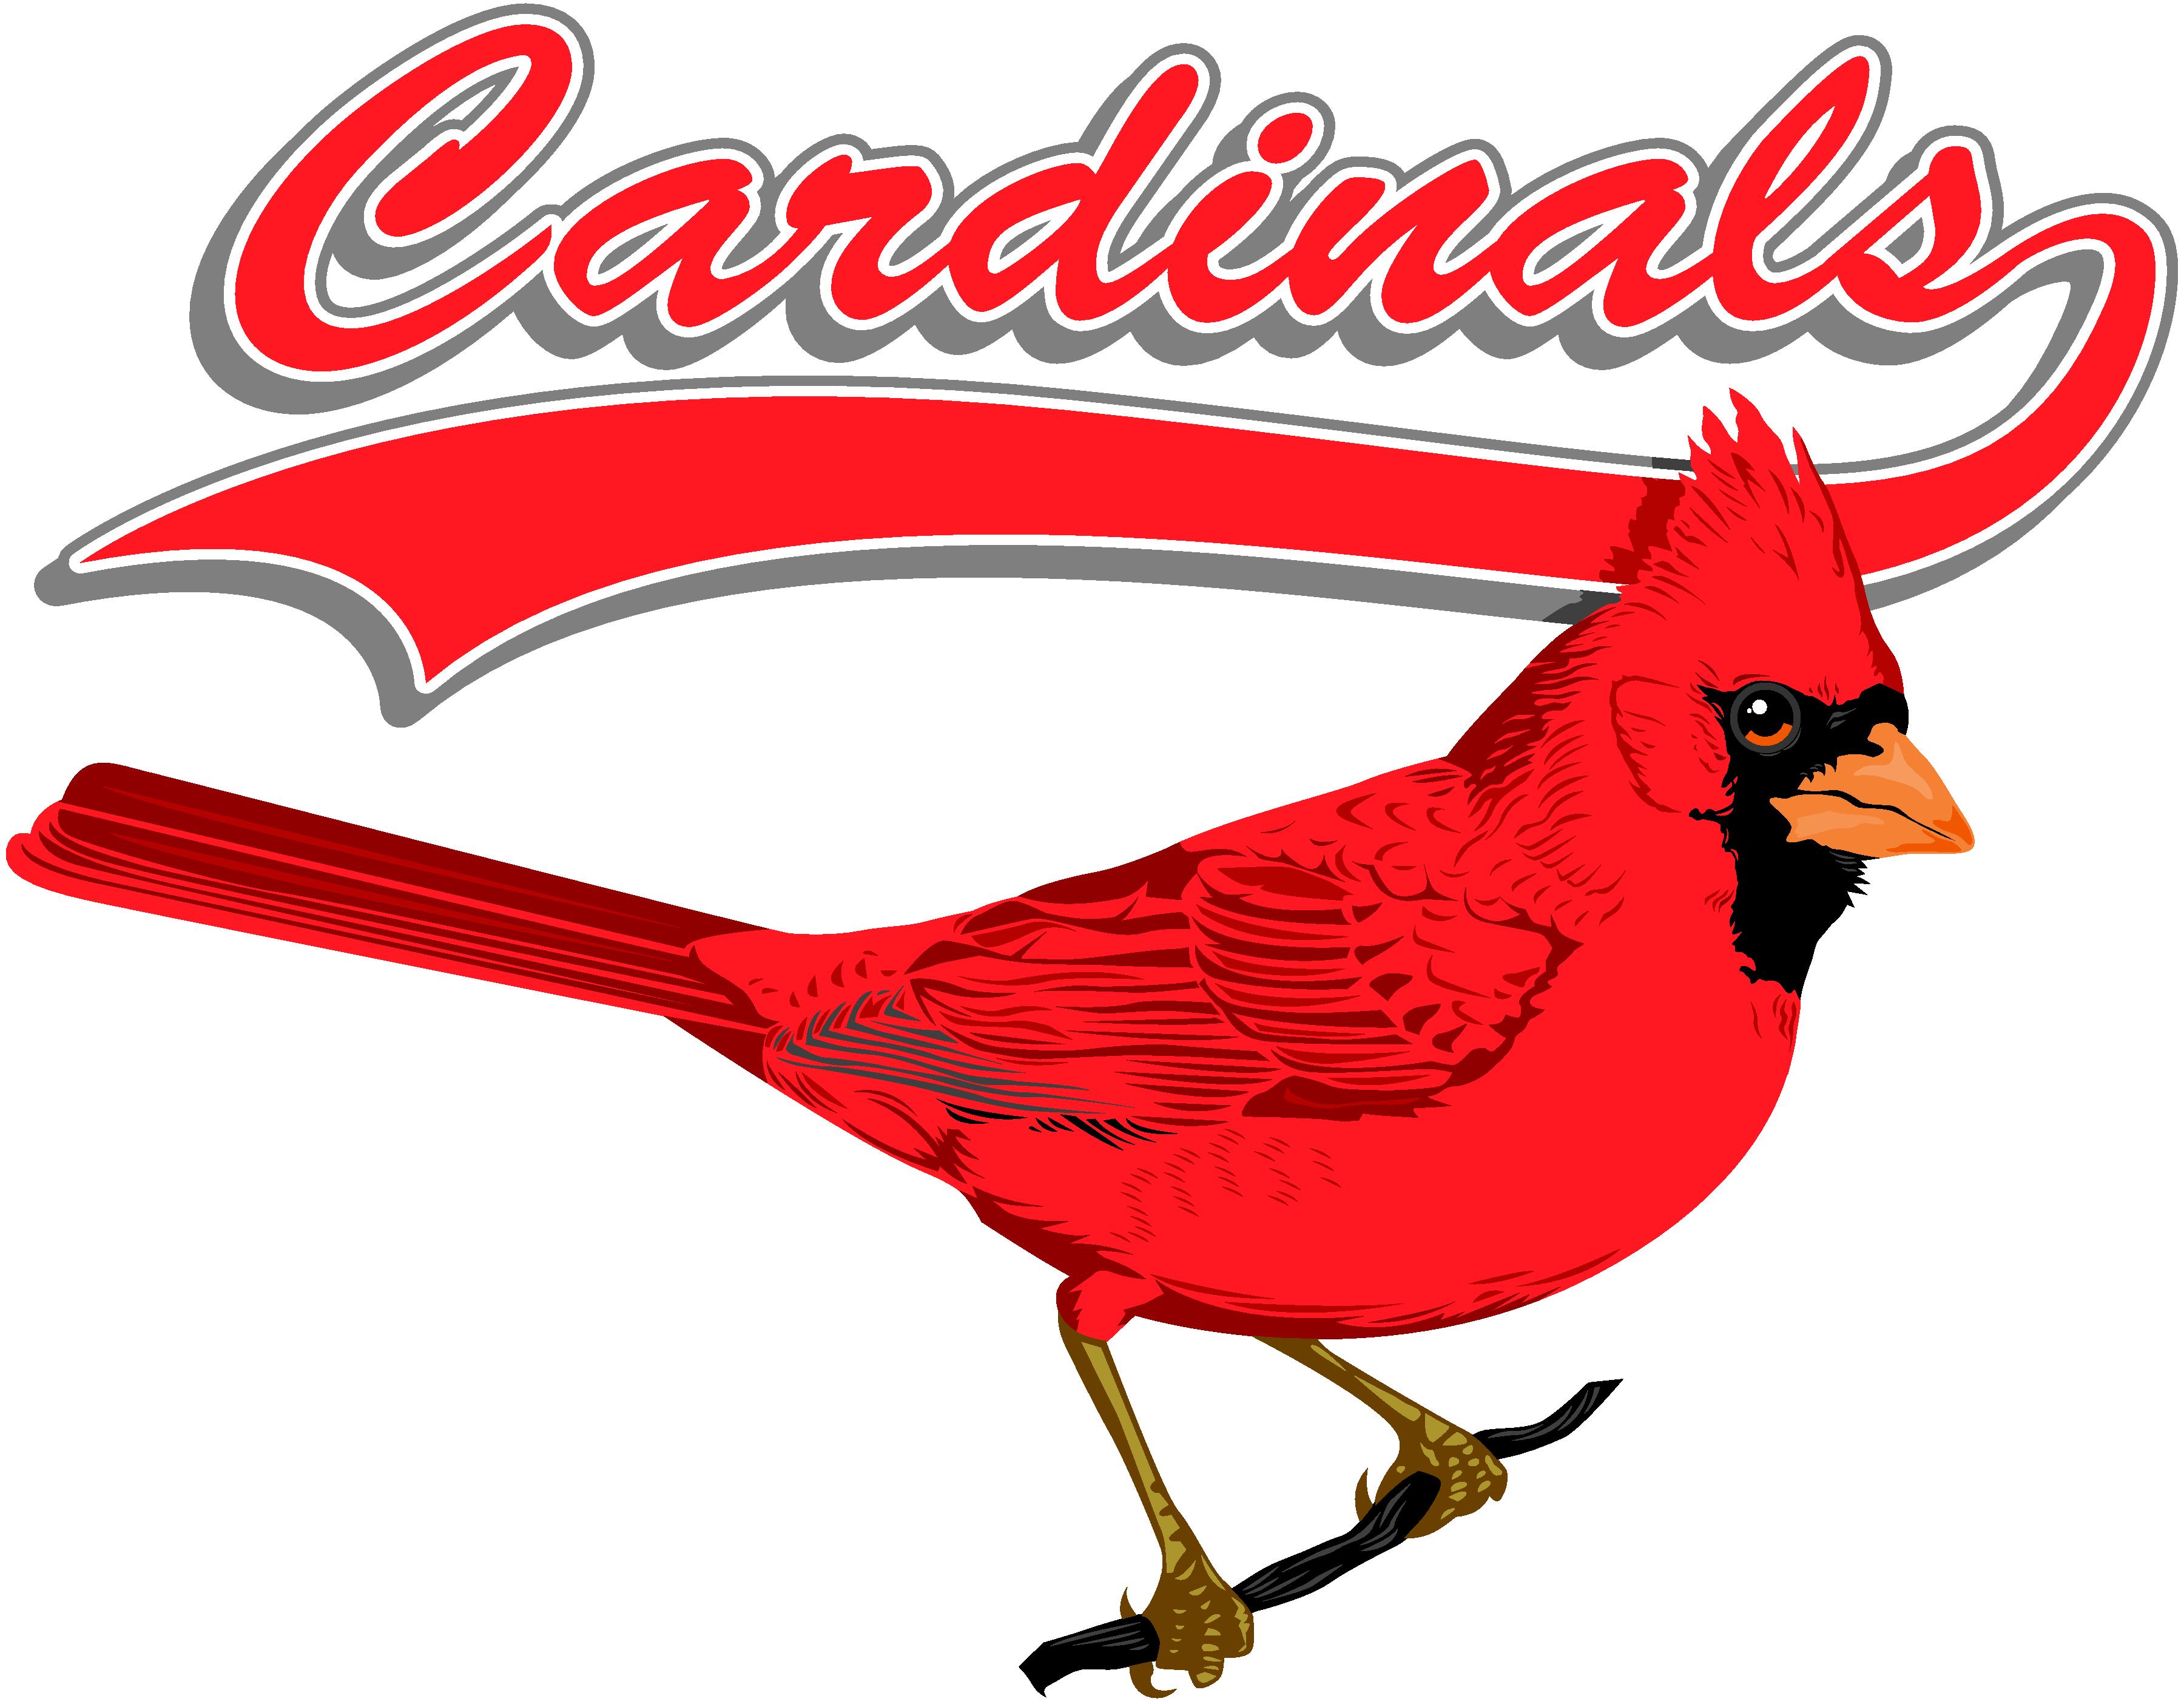 Atlanta Braves vs. St. Louis Cardinals Wild Card Game Tickets and Texas